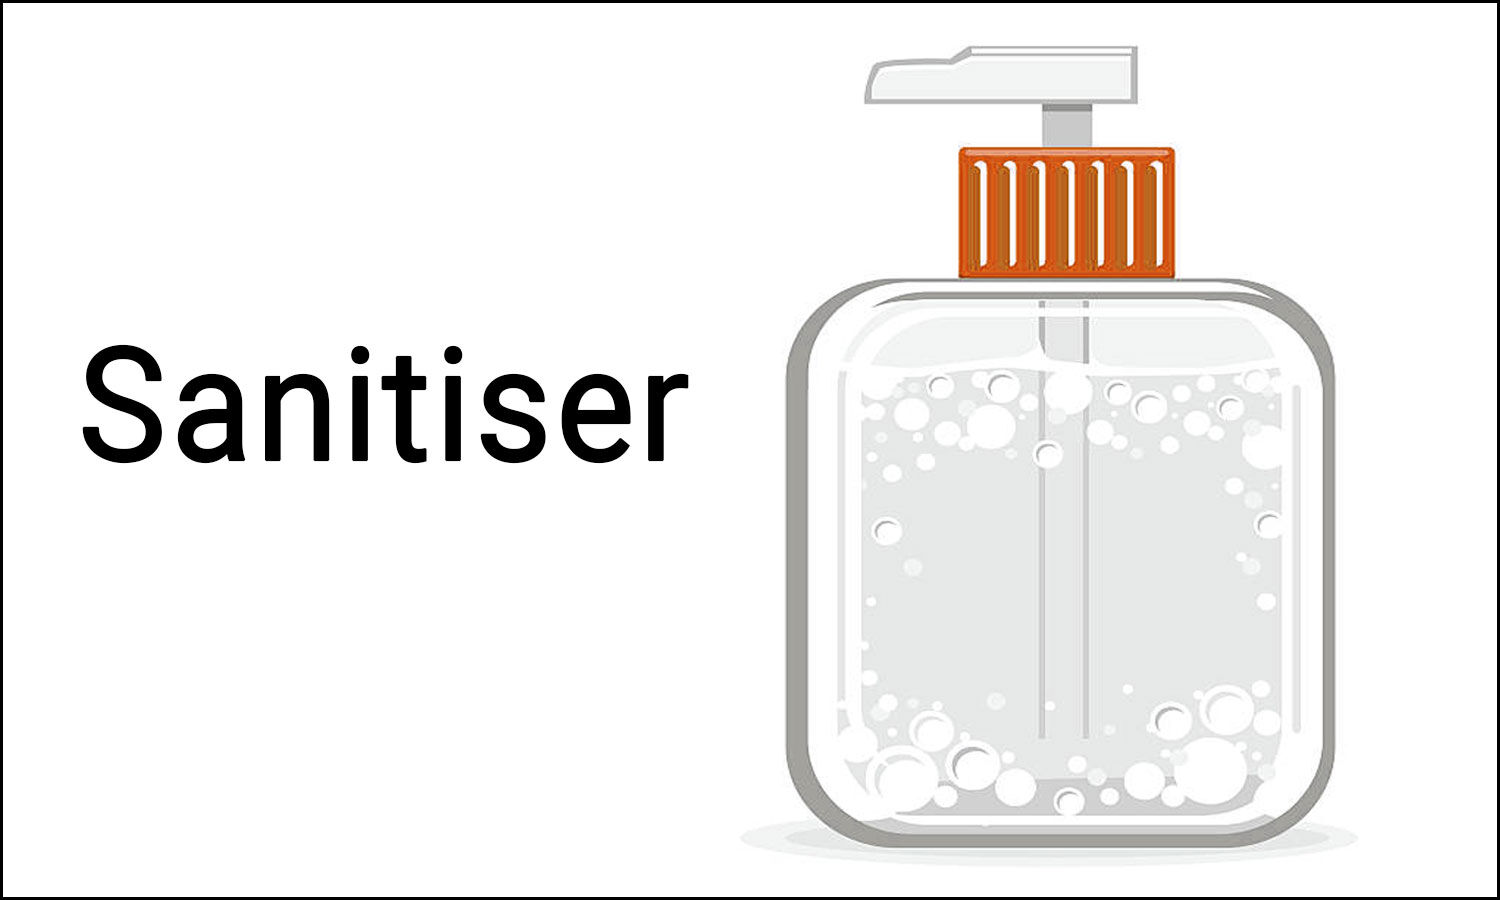 100 distilleries and more than 500 manufacturers permitted to produce hand sanitizers by Government